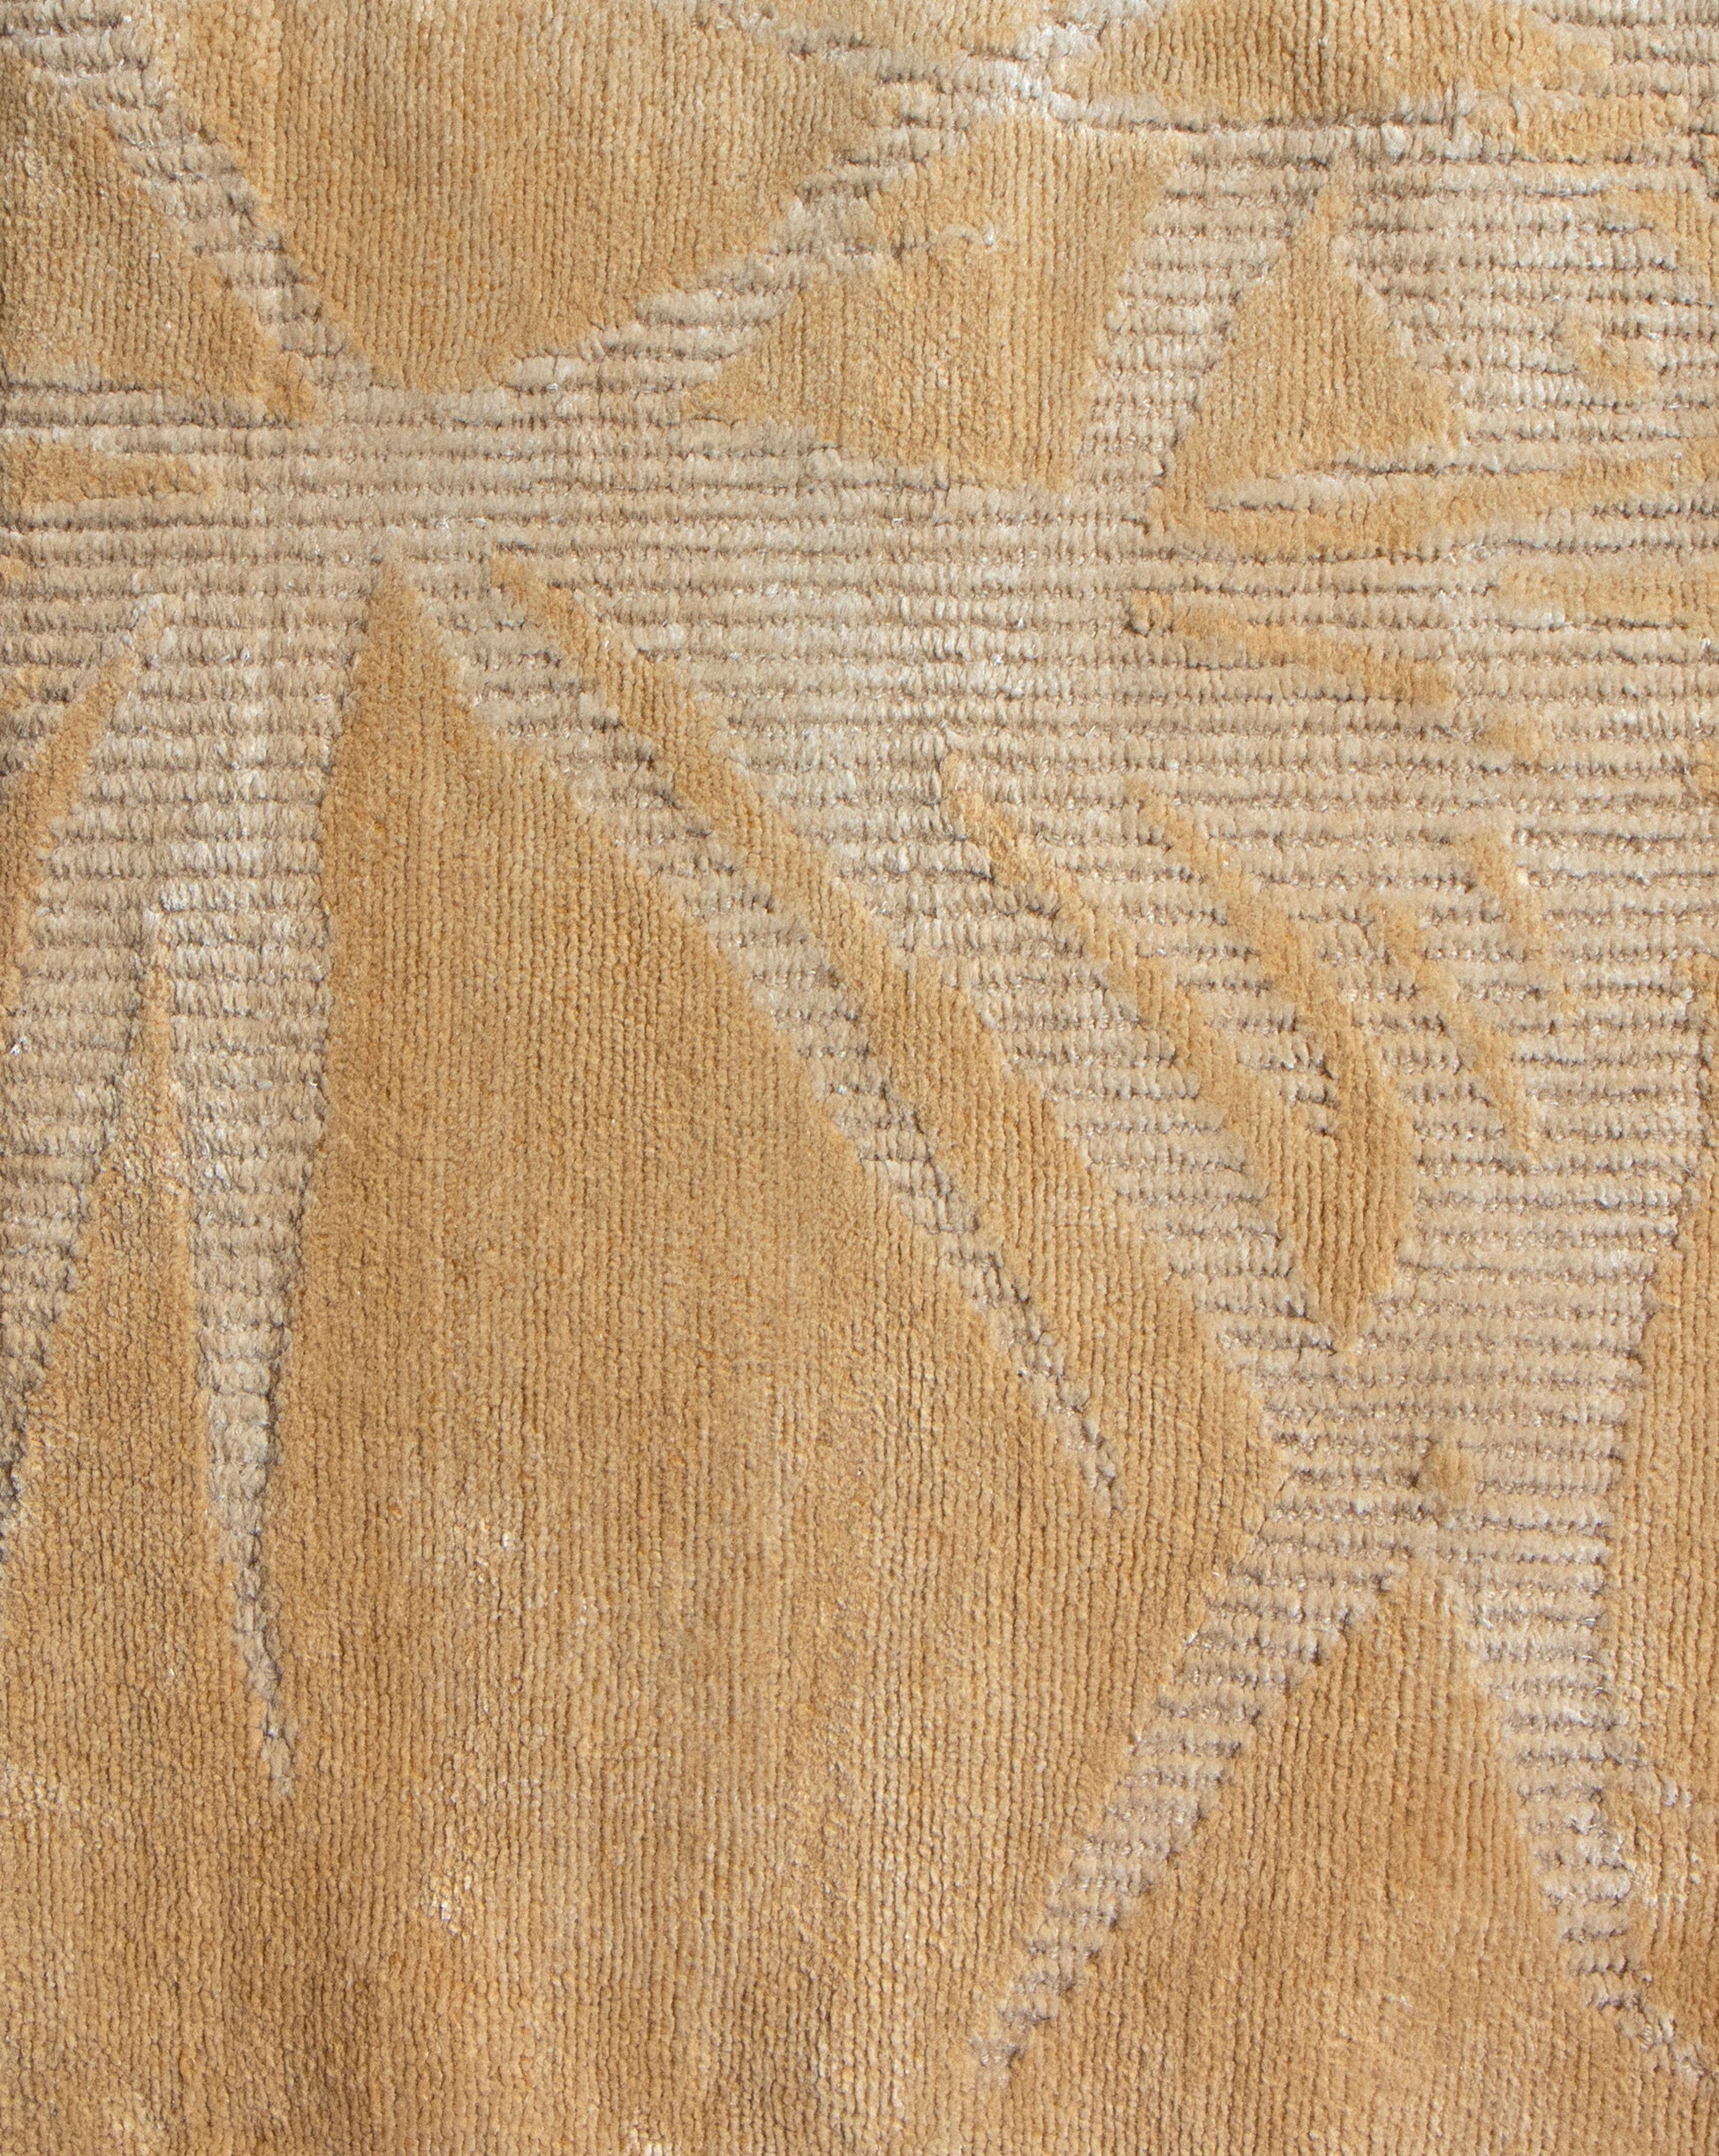 A close up of a Salentu Collection handmade rug with the Domenica Hand Knotted Rug 284' x 95' Gold pattern